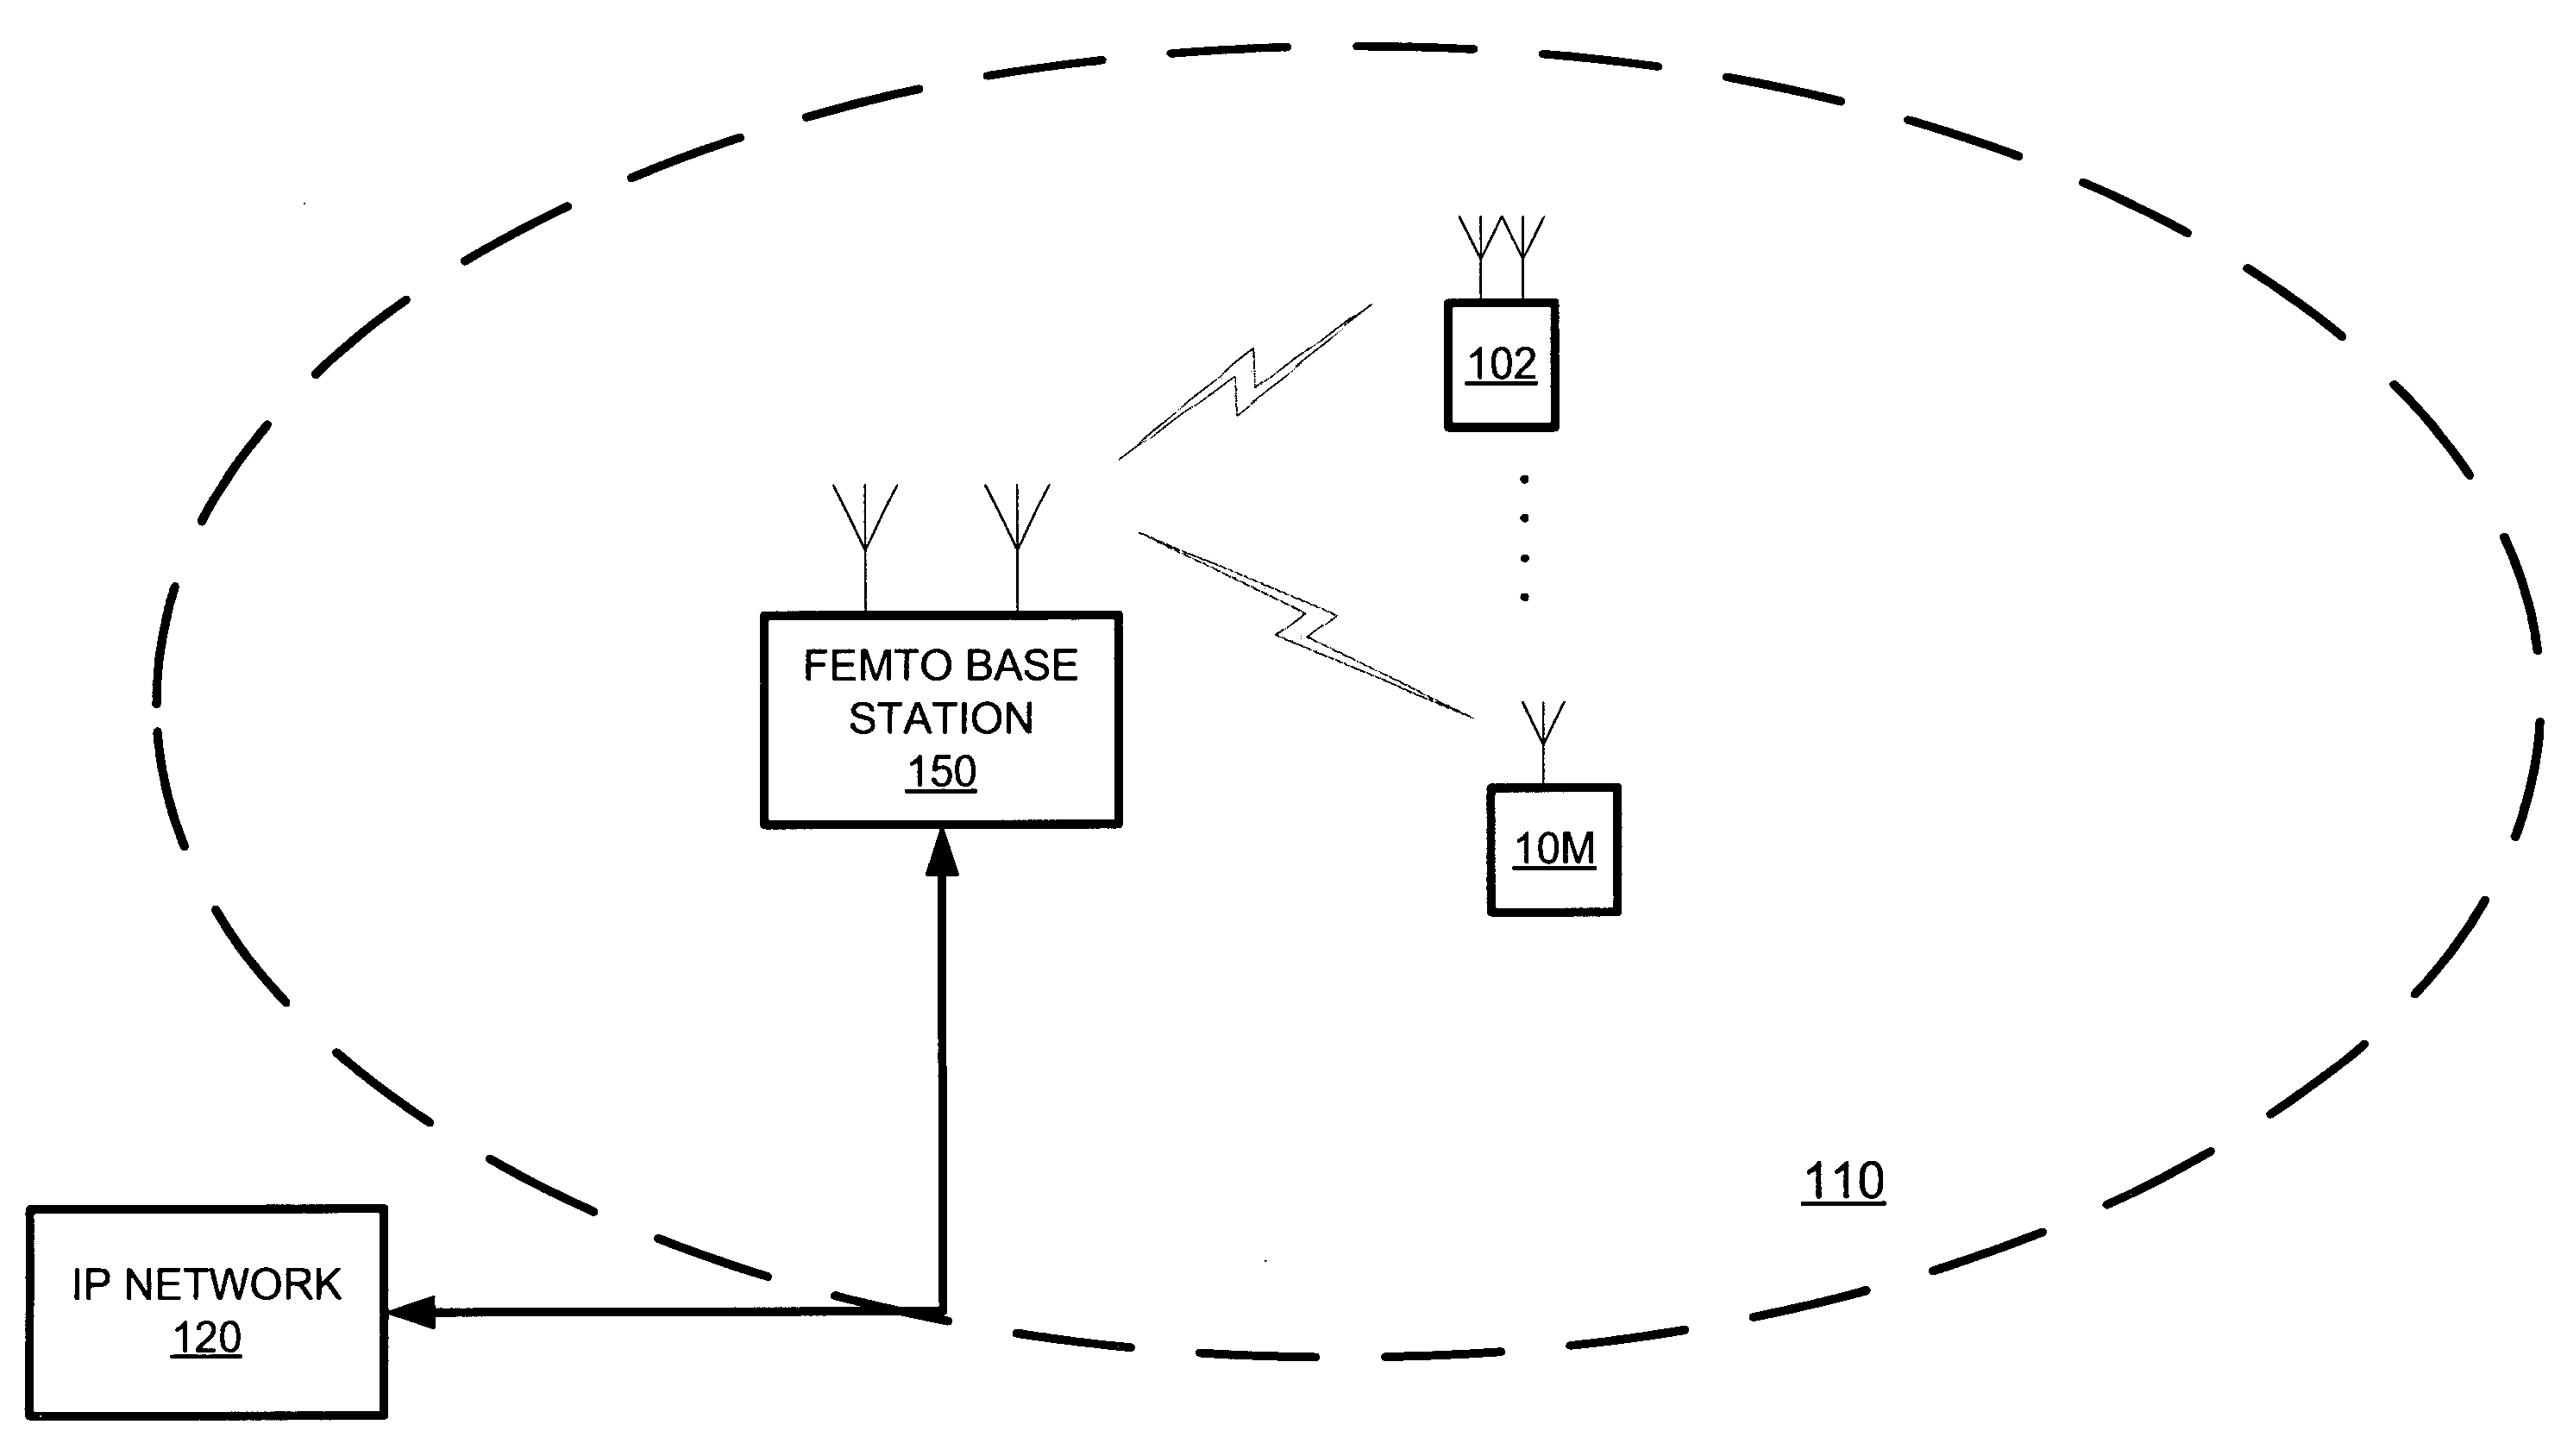 Femto base stations and methods for operating the same